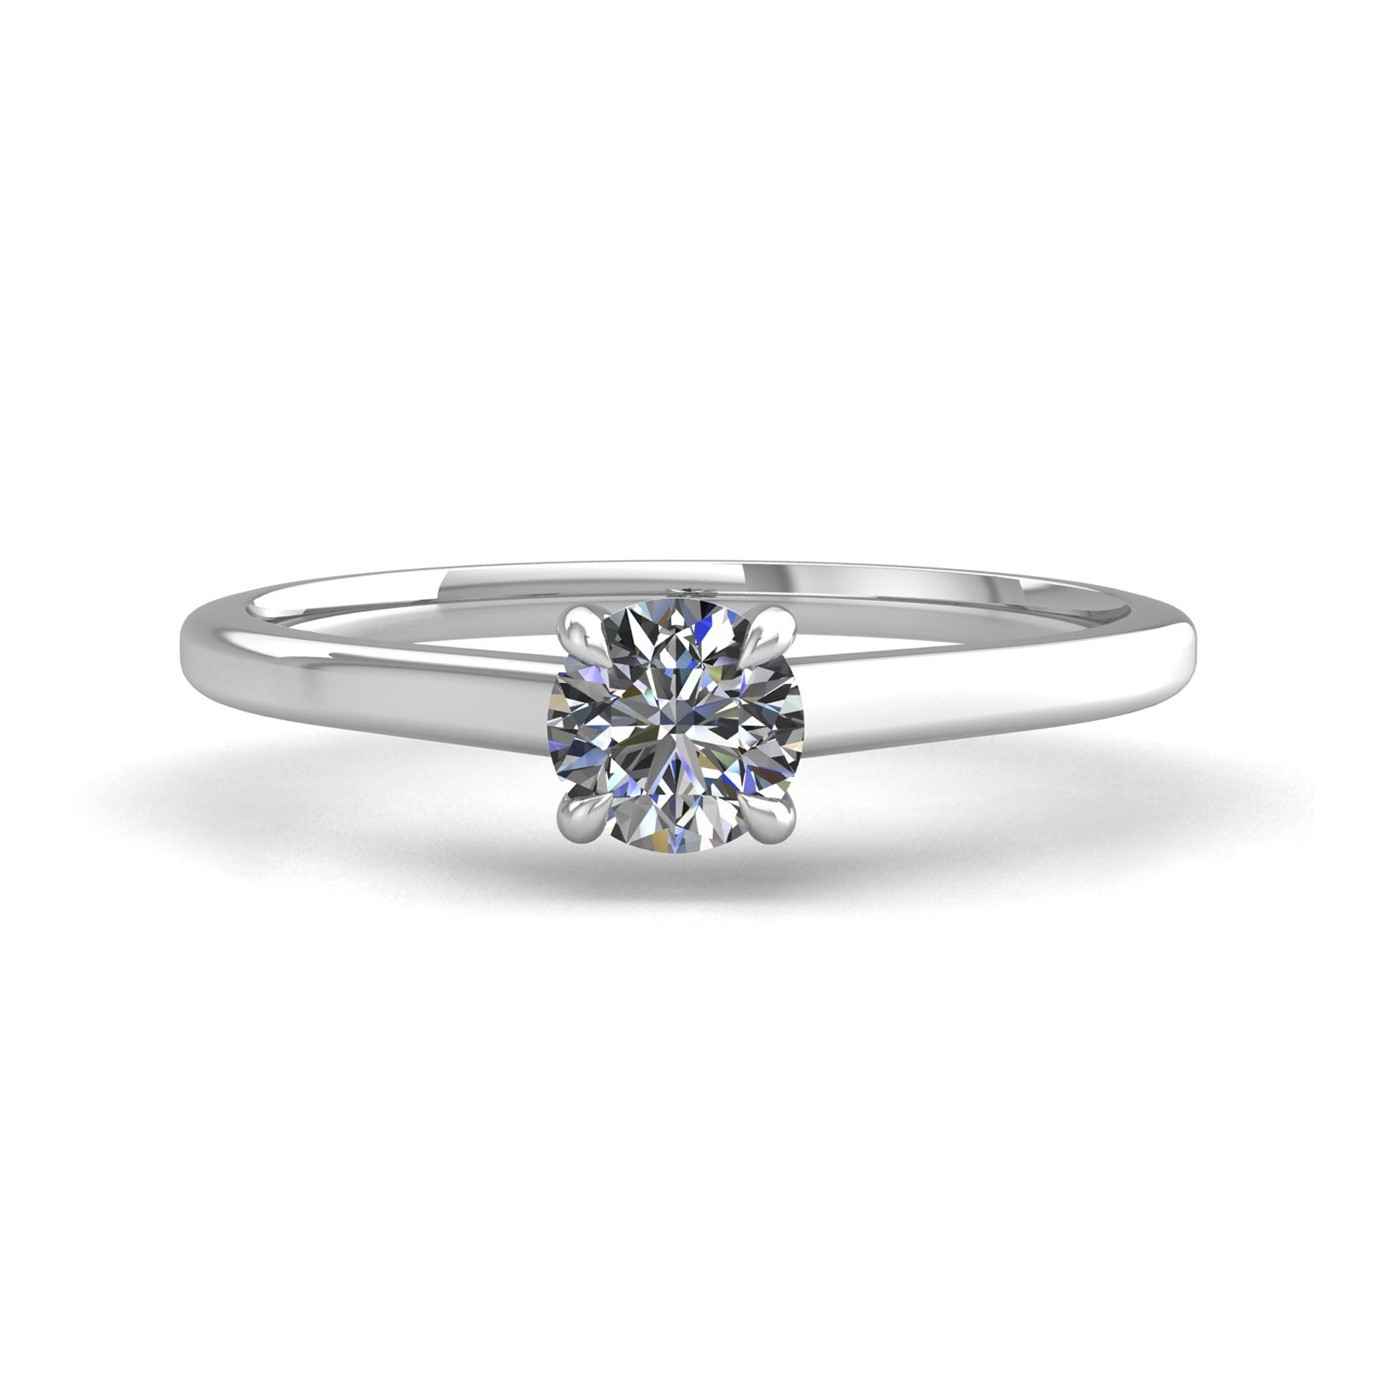 18k white gold 2,50 ct 4 prongs solitaire round cut diamond engagement ring with whisper thin band Photos & images